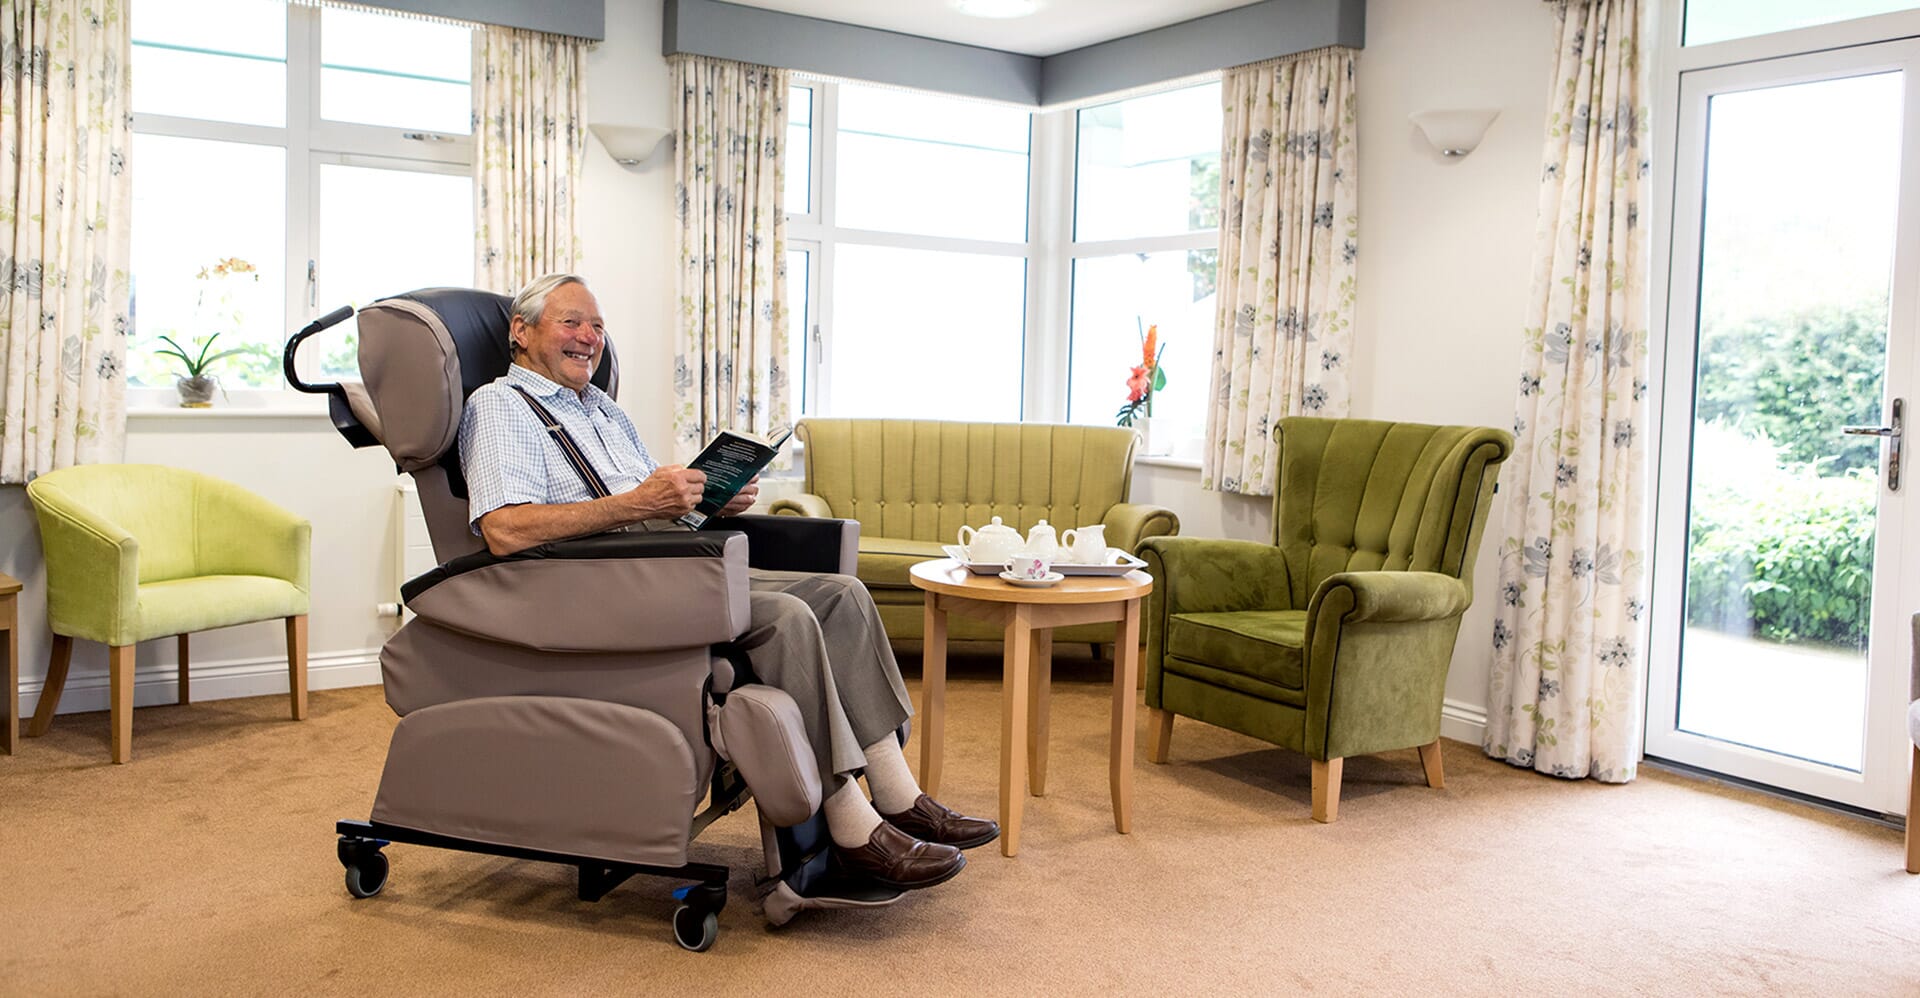  Comfort Chairs For Elderly